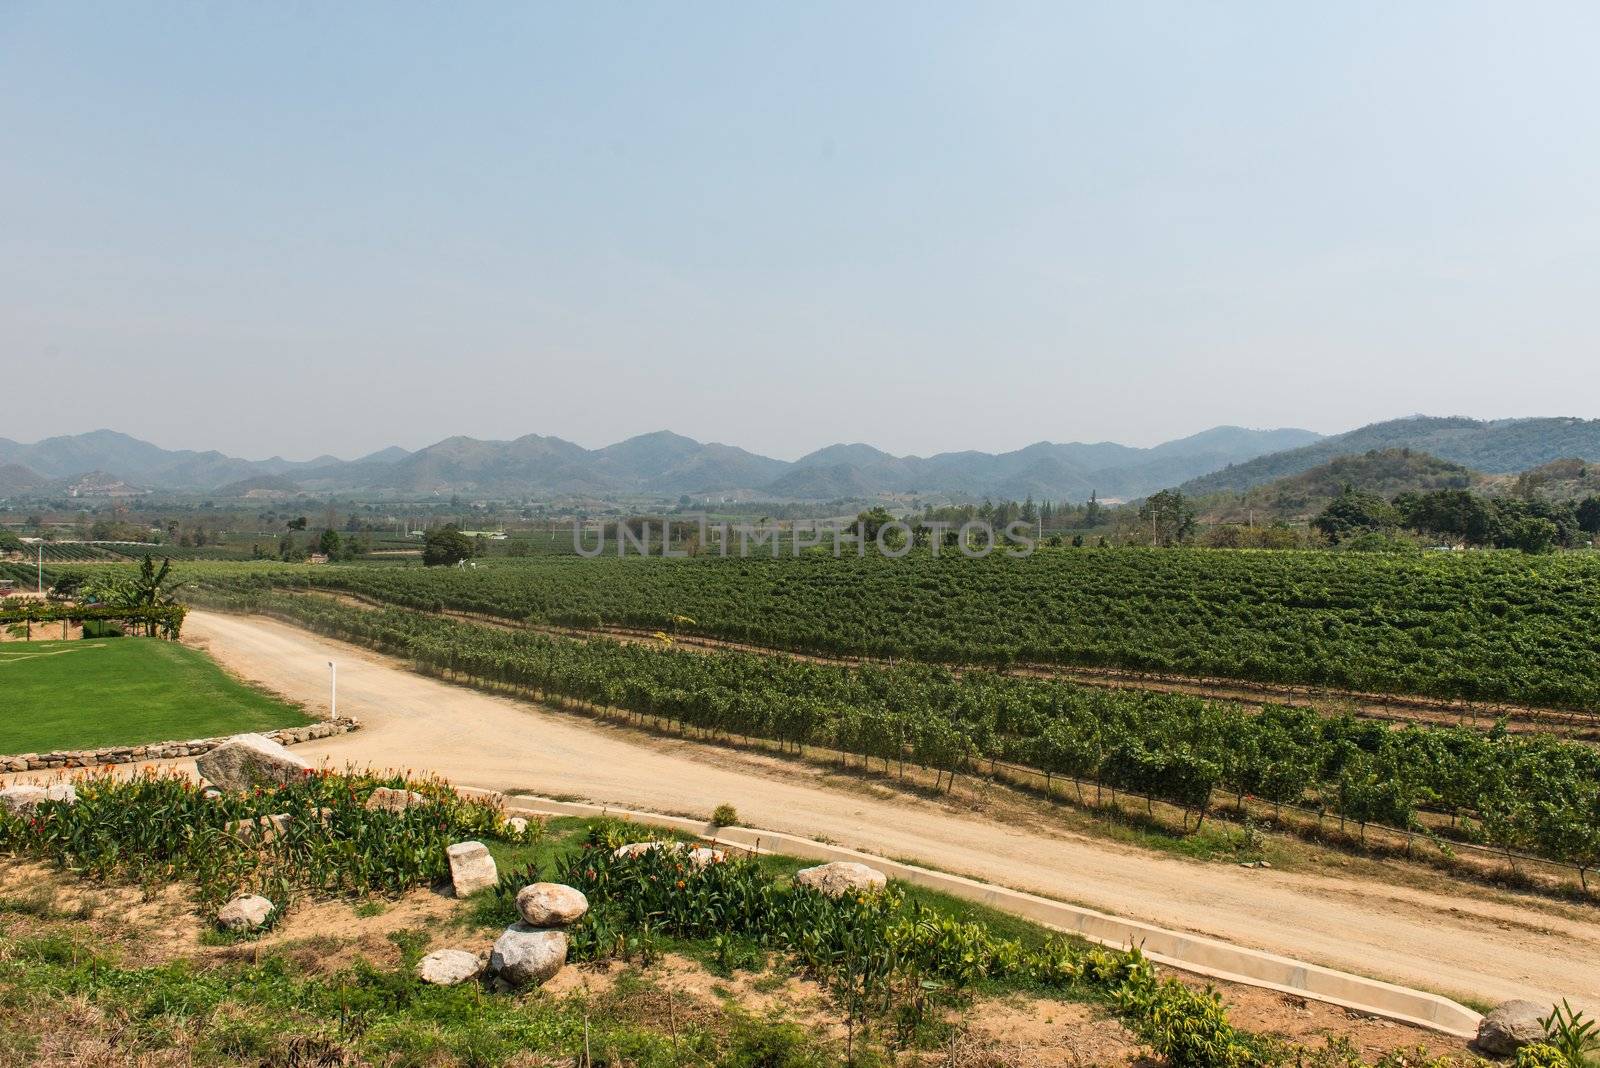 Grape wine vine yard green field in south of Thailand, taken on a sunny afternoon 